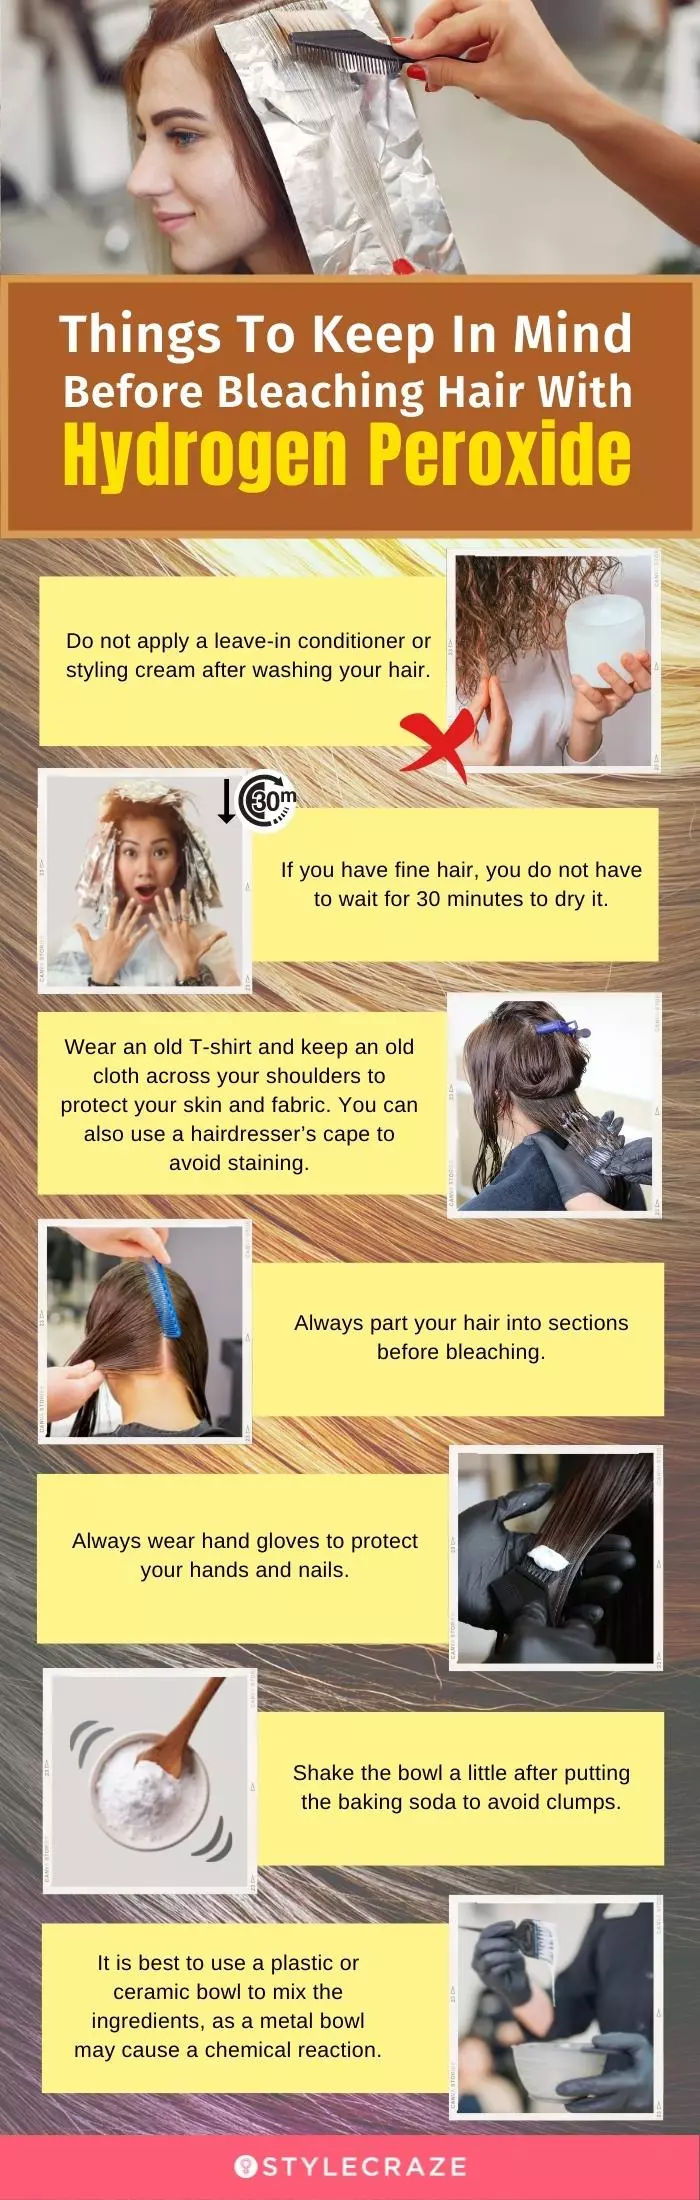 things to keep in mind before bleaching hair with hydrogen peroxide (infographic)